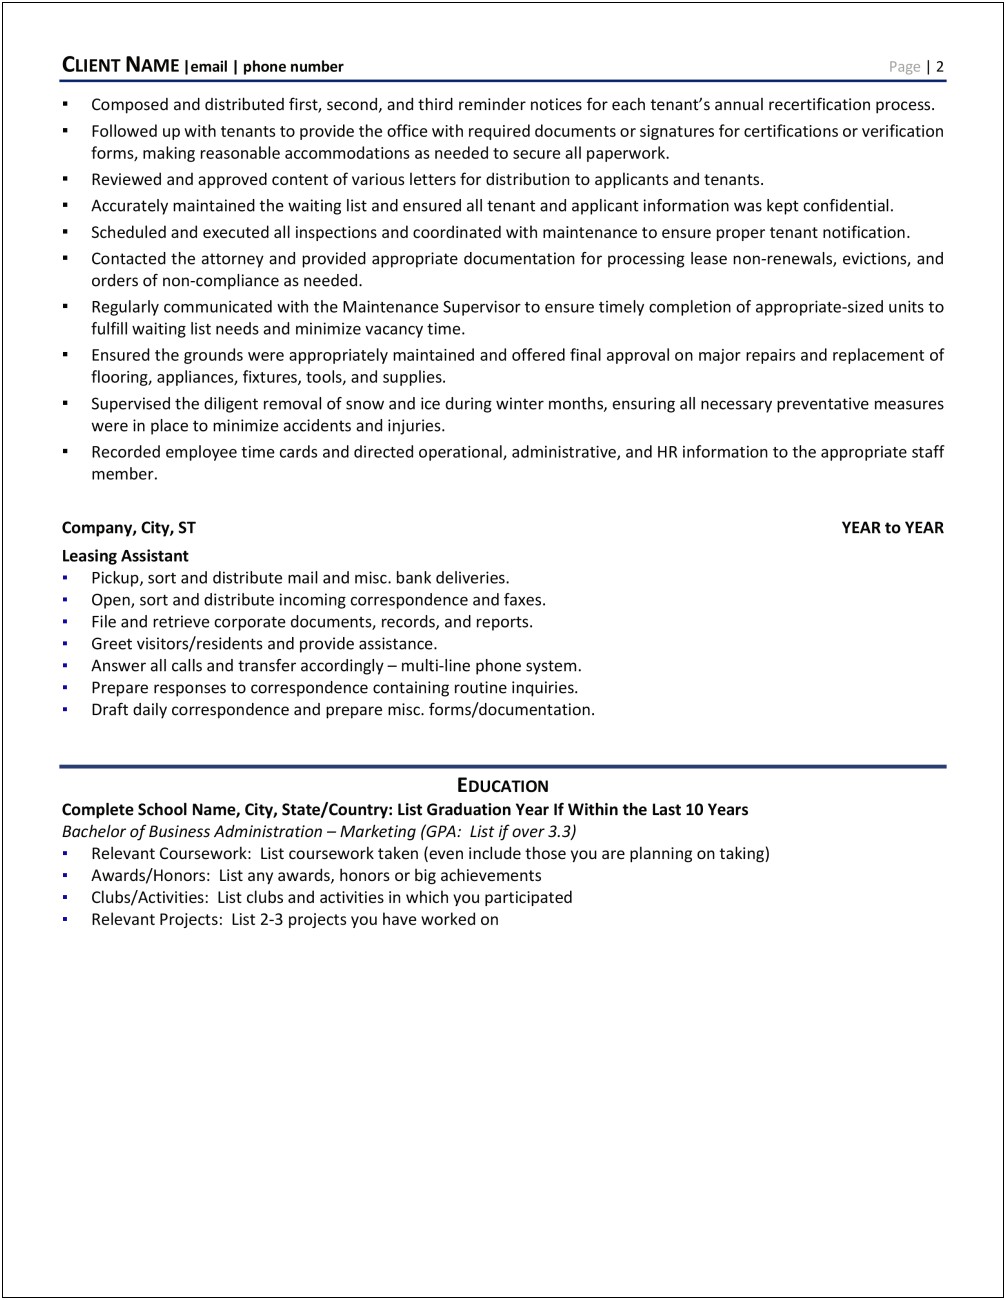 Tax Credit Property Manager Resume